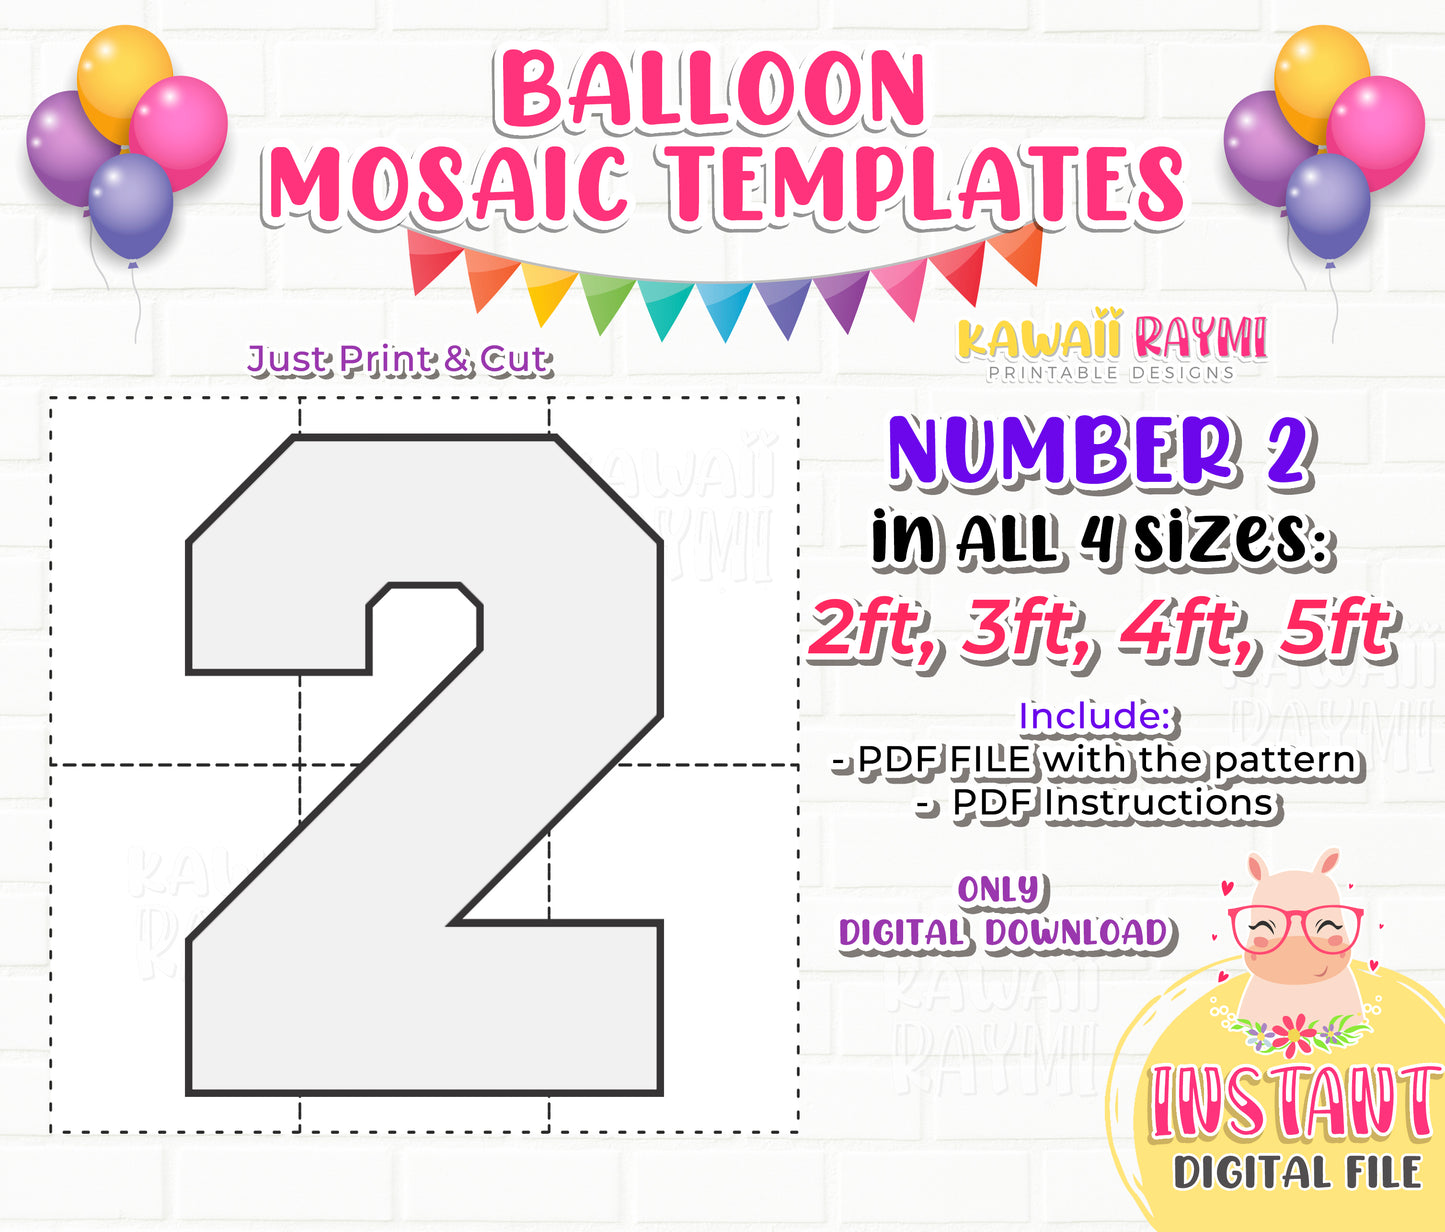 SQUARE Number 2, Balloon Mosaic Template, One Mosaic Number Template, Mosaic Numbers from Balloons, 2ft, 3ft, 4ft, 5ft, Digital Download